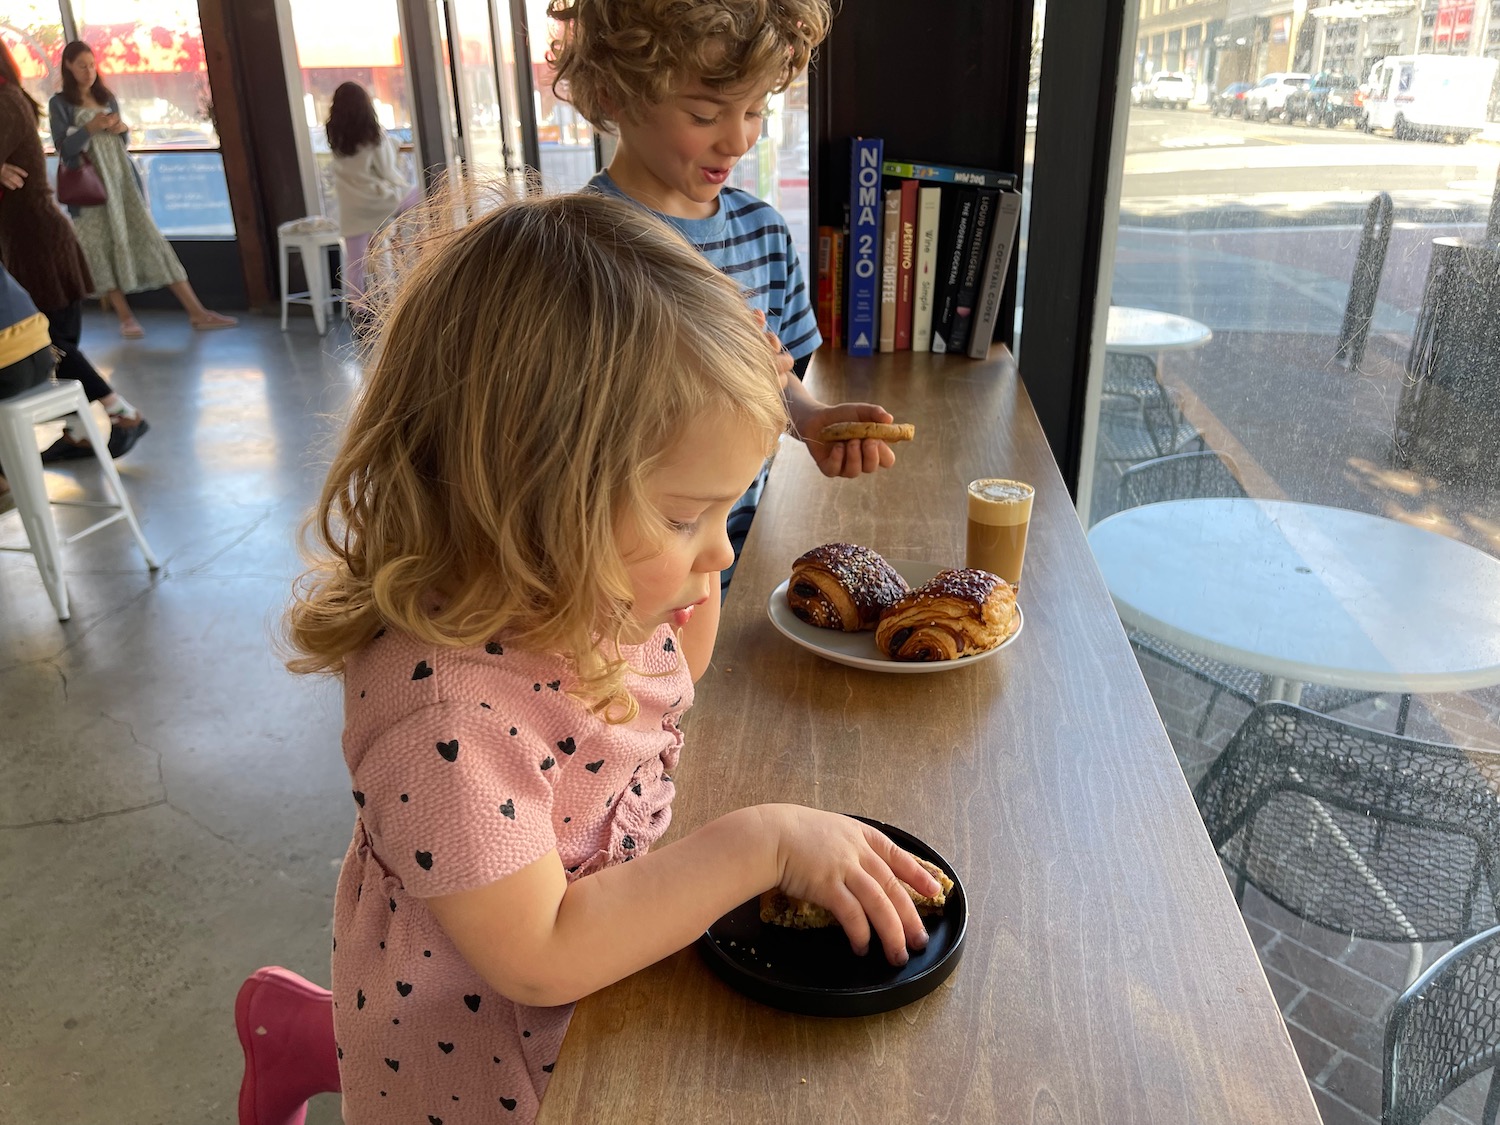 a boy and girl eating pastries at a table